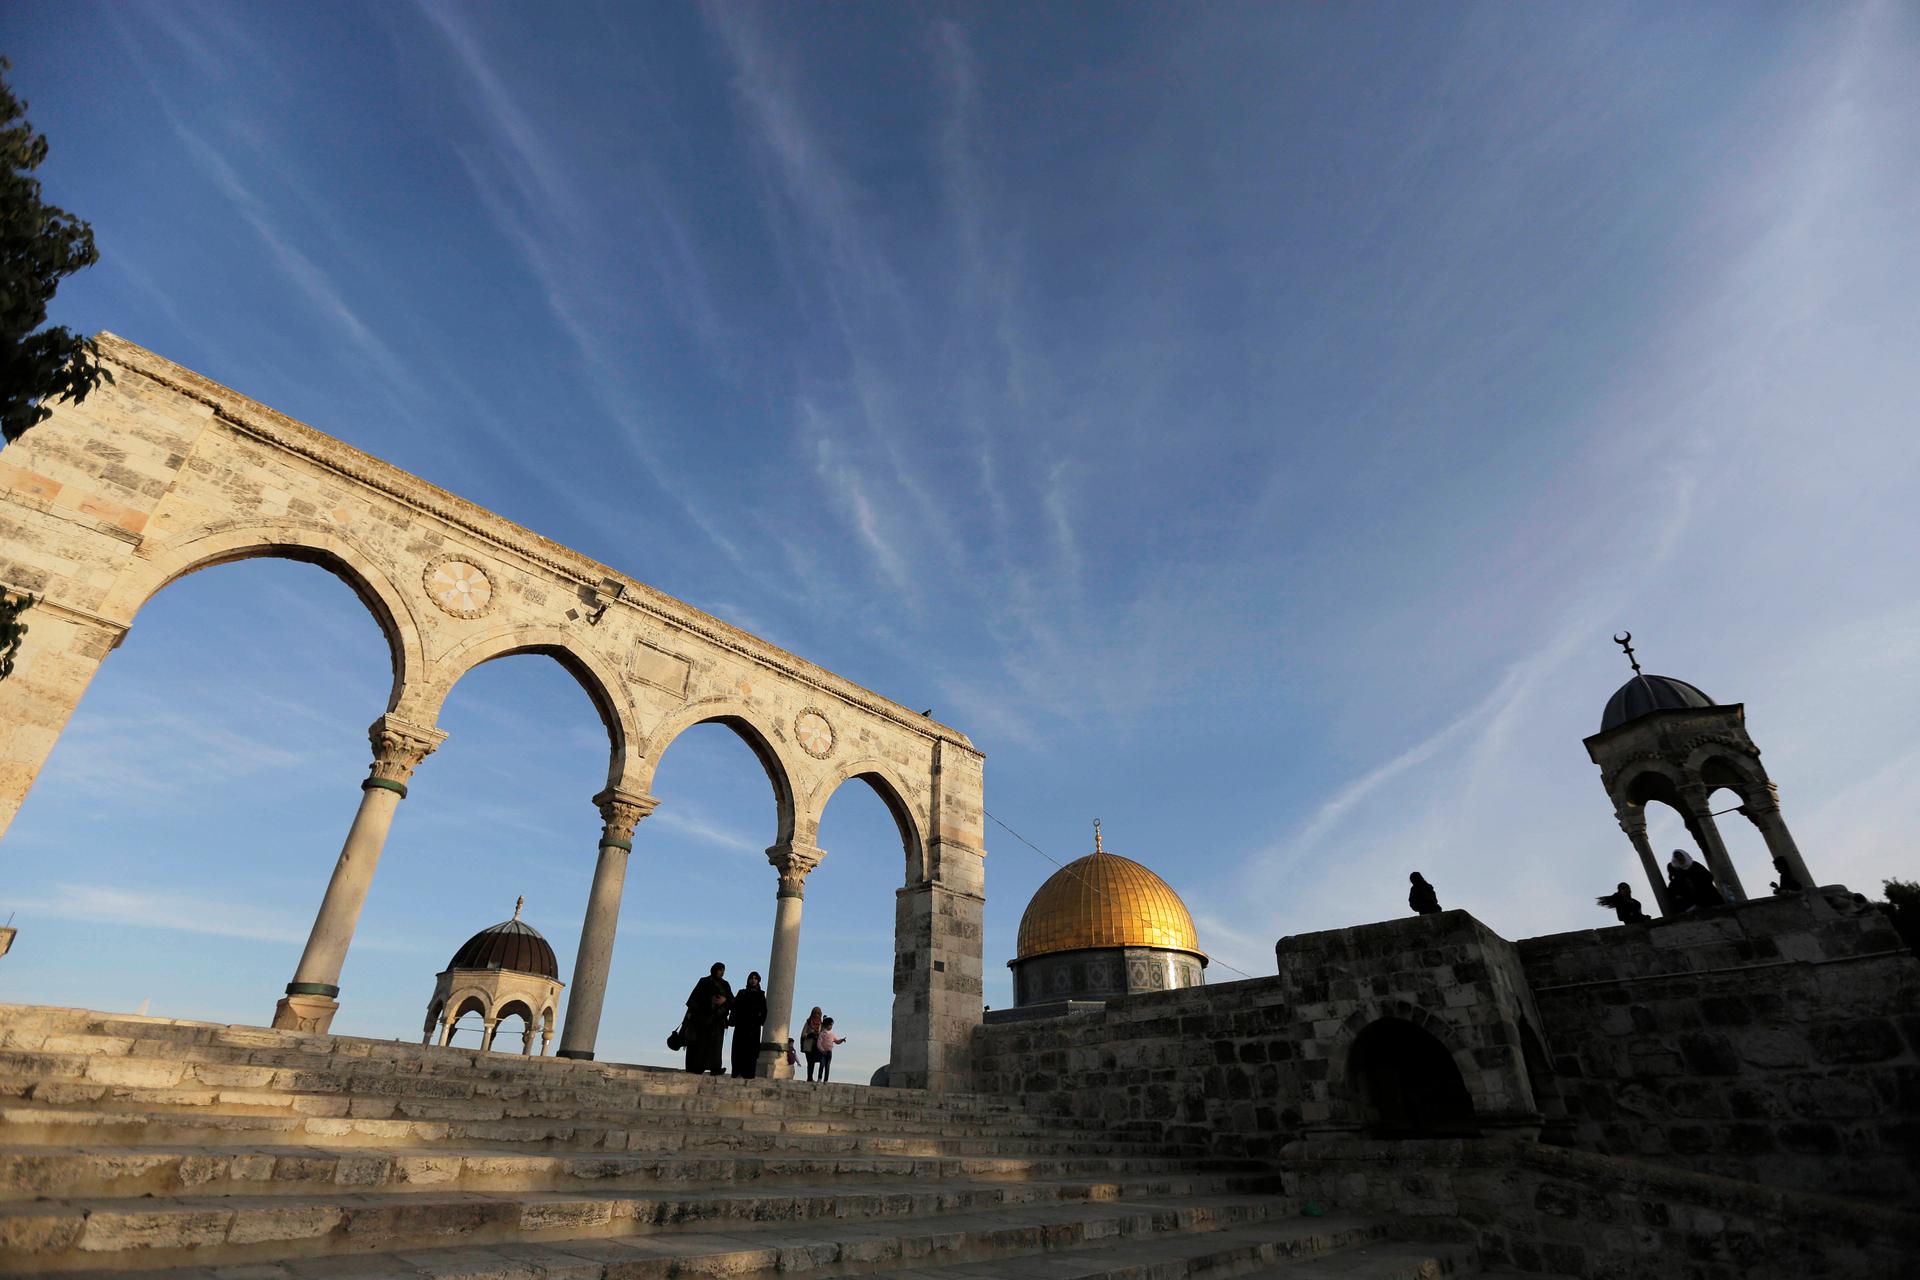 While Israel claims Jerusalem as its capital, few countries officially recognize the city's status because of sensitive disputes over who controls it.